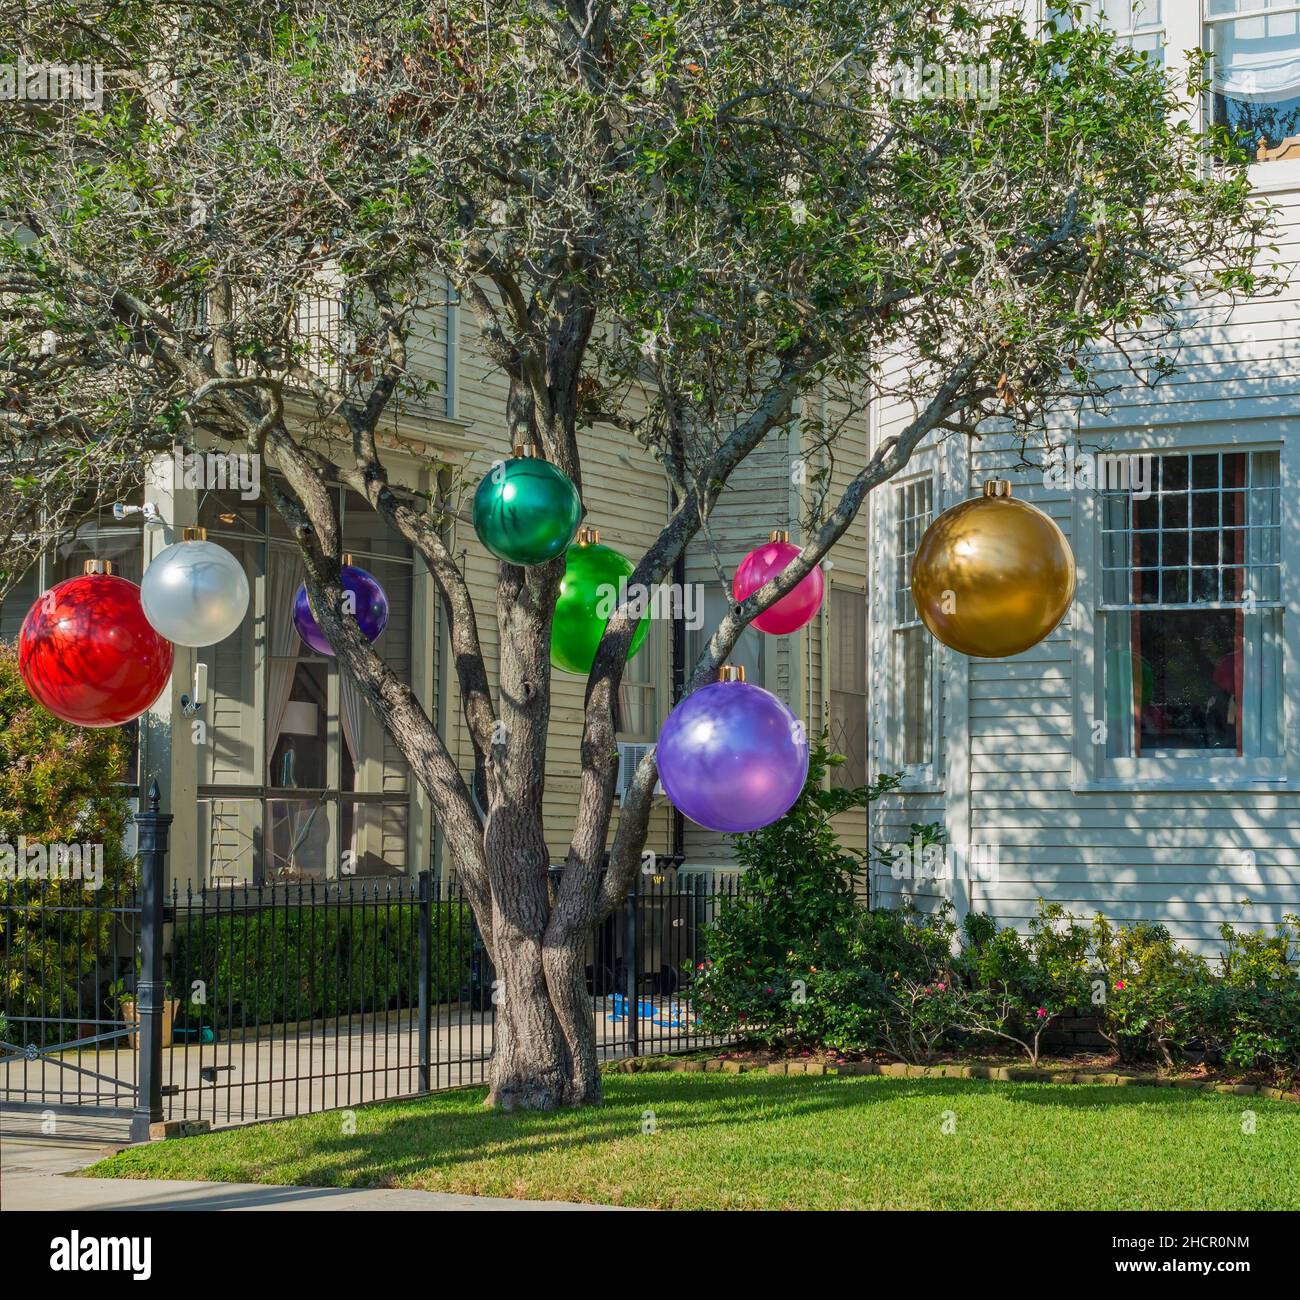 NEW ORLEANS, LA, USA - DECEMBER 30, 2021: Huge Christmas tree ornaments displayed on a wax myrtle tree in Uptown Neighborhood Stock Photo